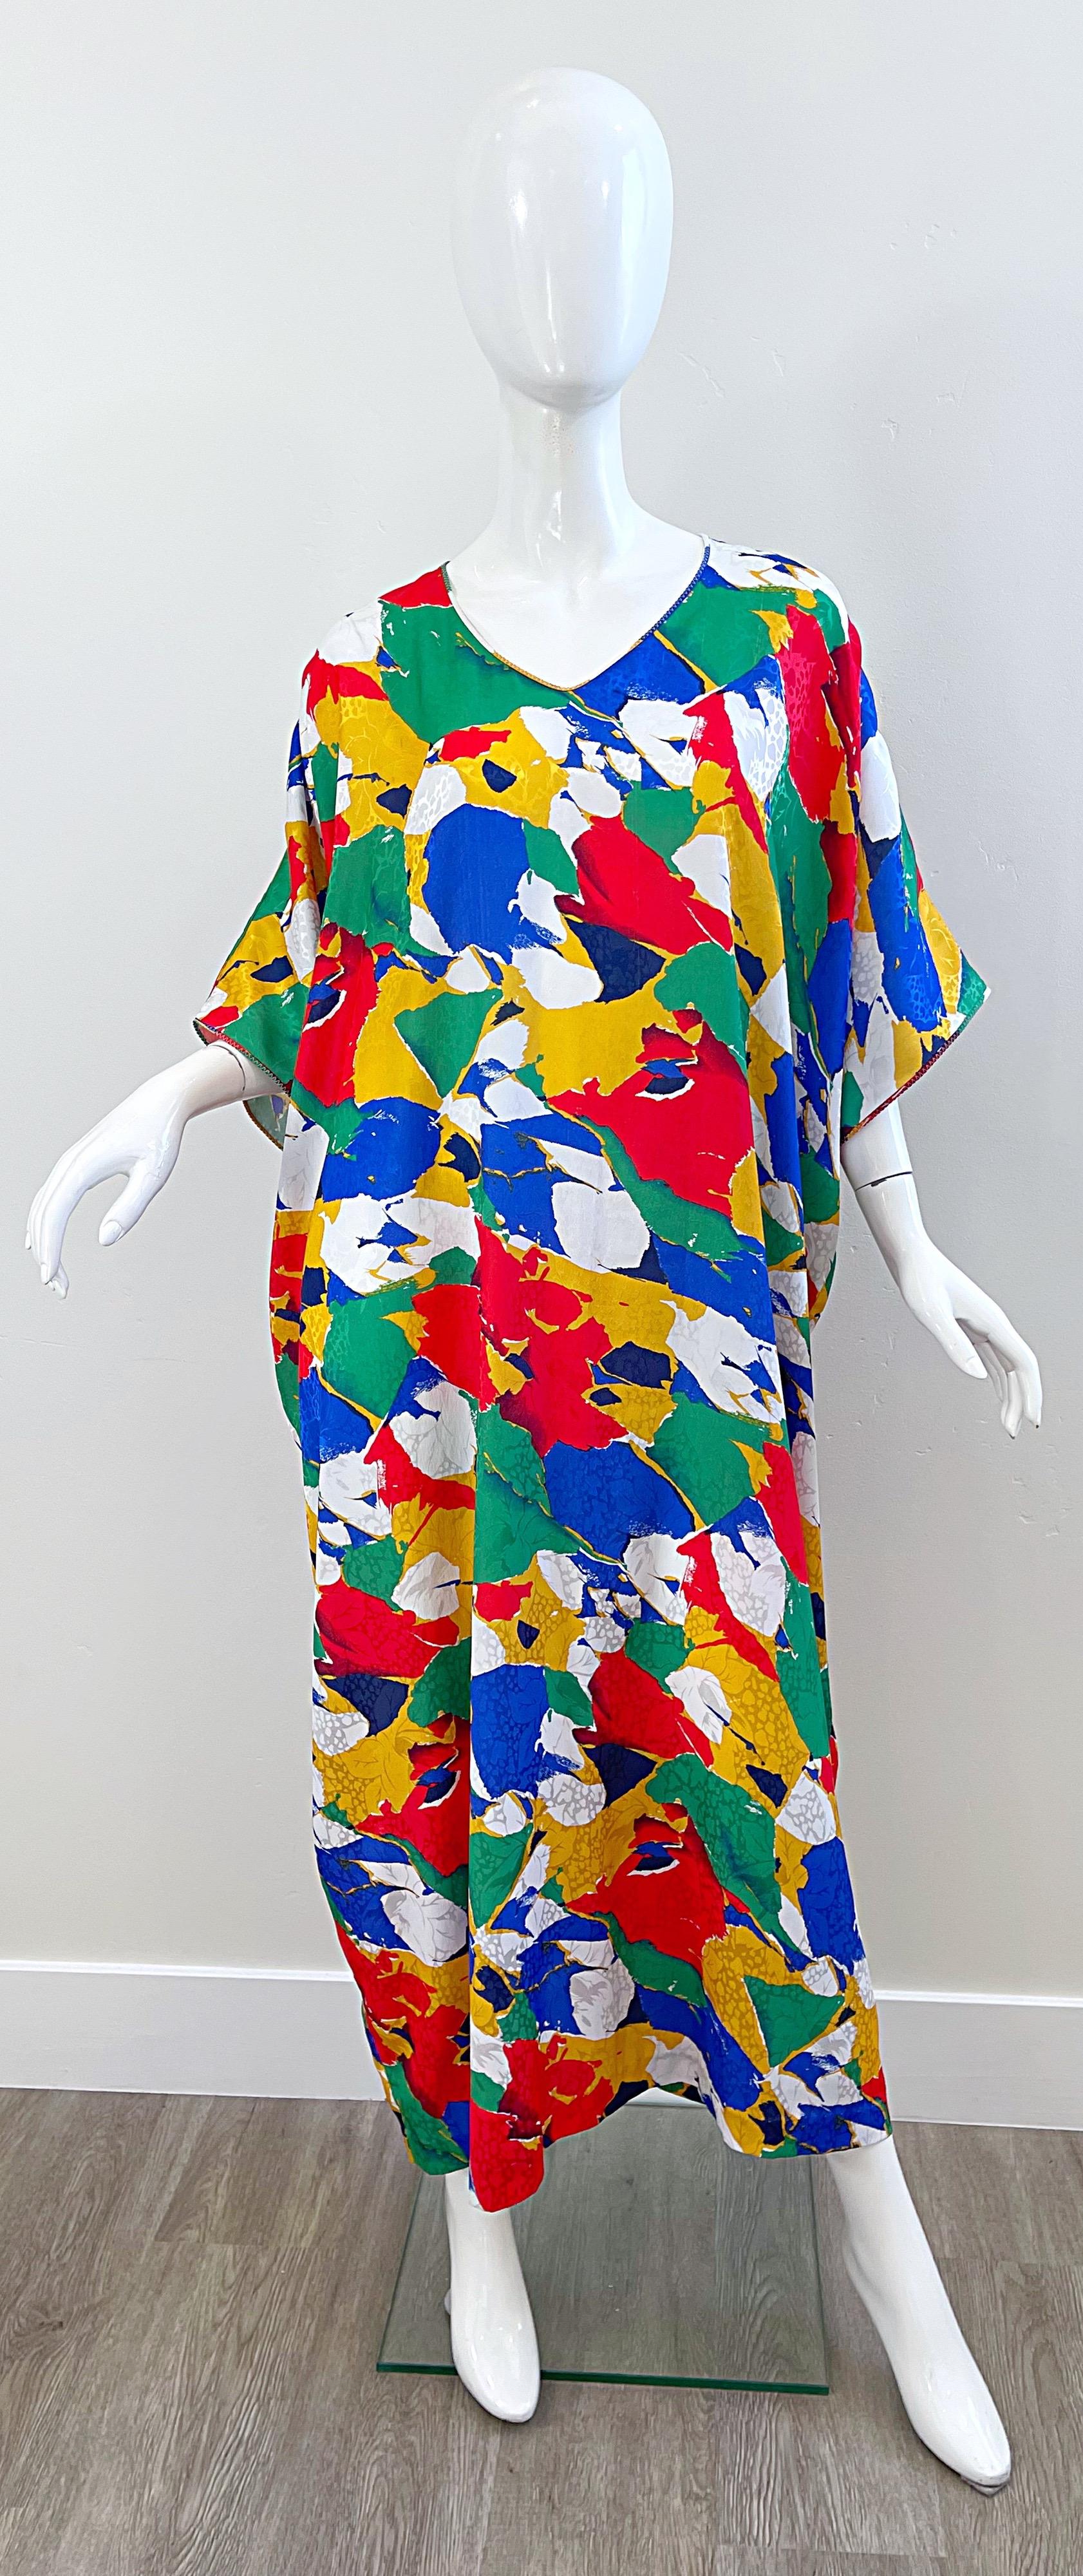 Amazing vintage MARY MCFADDEN colorful abstract print caftan ! Bright colors of blue, red, yellow, green, and white throughout. Simply slips over the head. Can be worn belted or alone. The pictured black Jane August patent leather embossed belt is